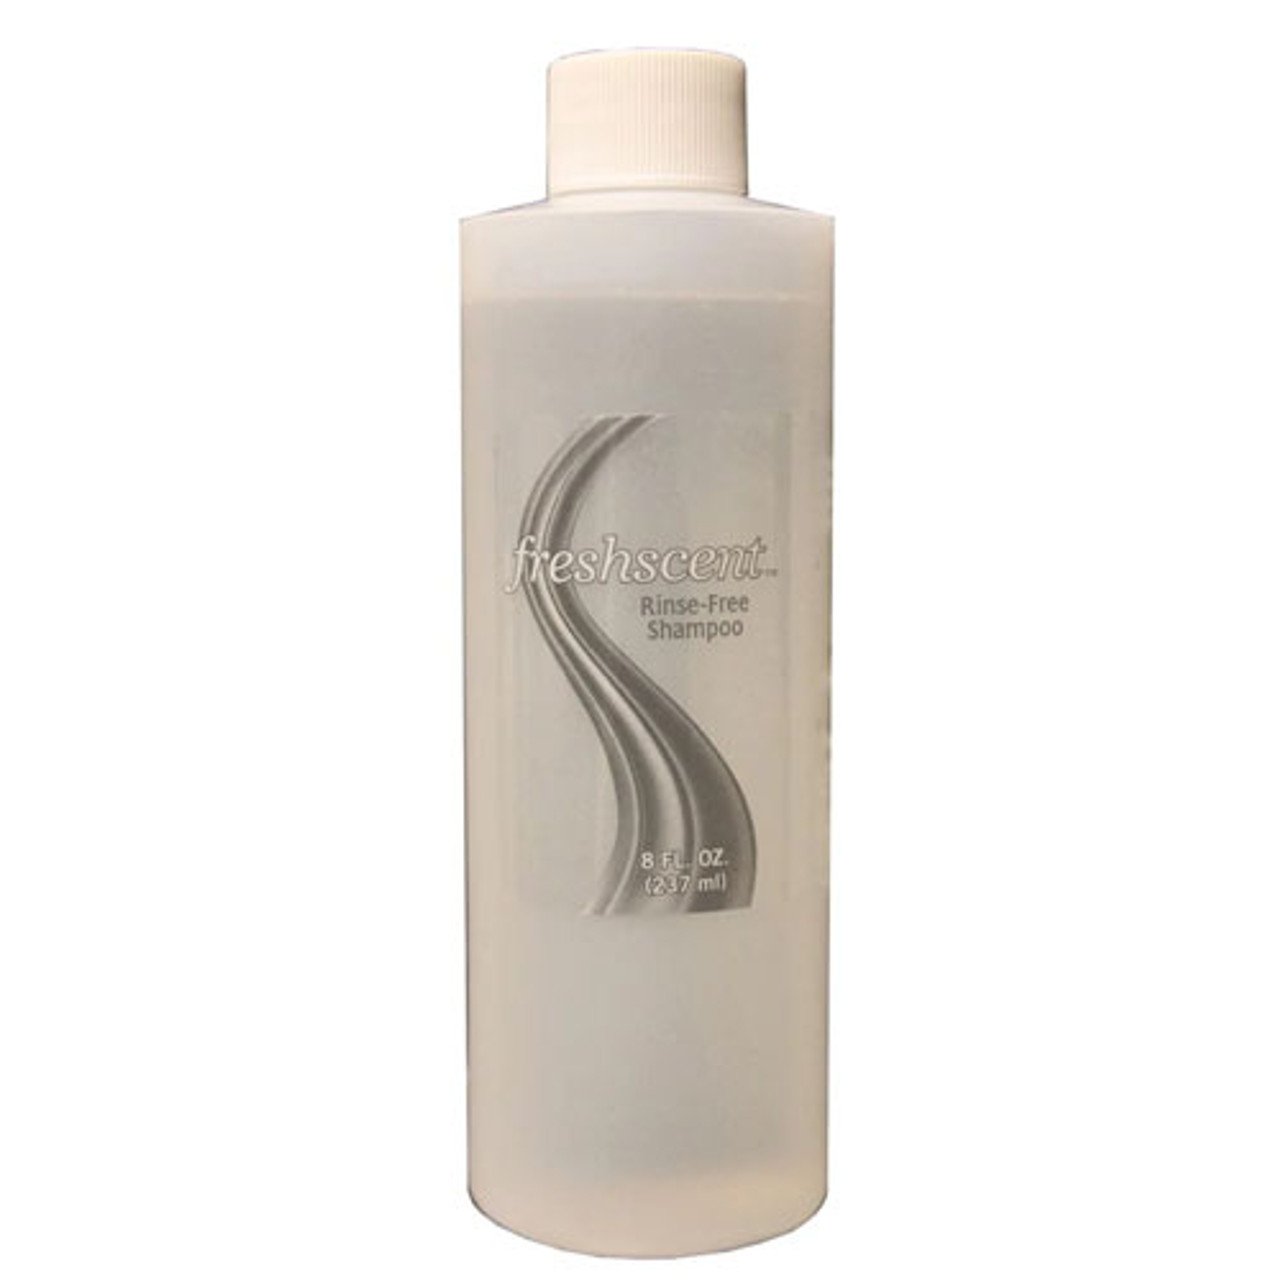 NWI Shampoo & Conditioner Rinse Free Shampoo, 8 oz, 36/cs (Made in USA) (To Be DISCONTINUED)